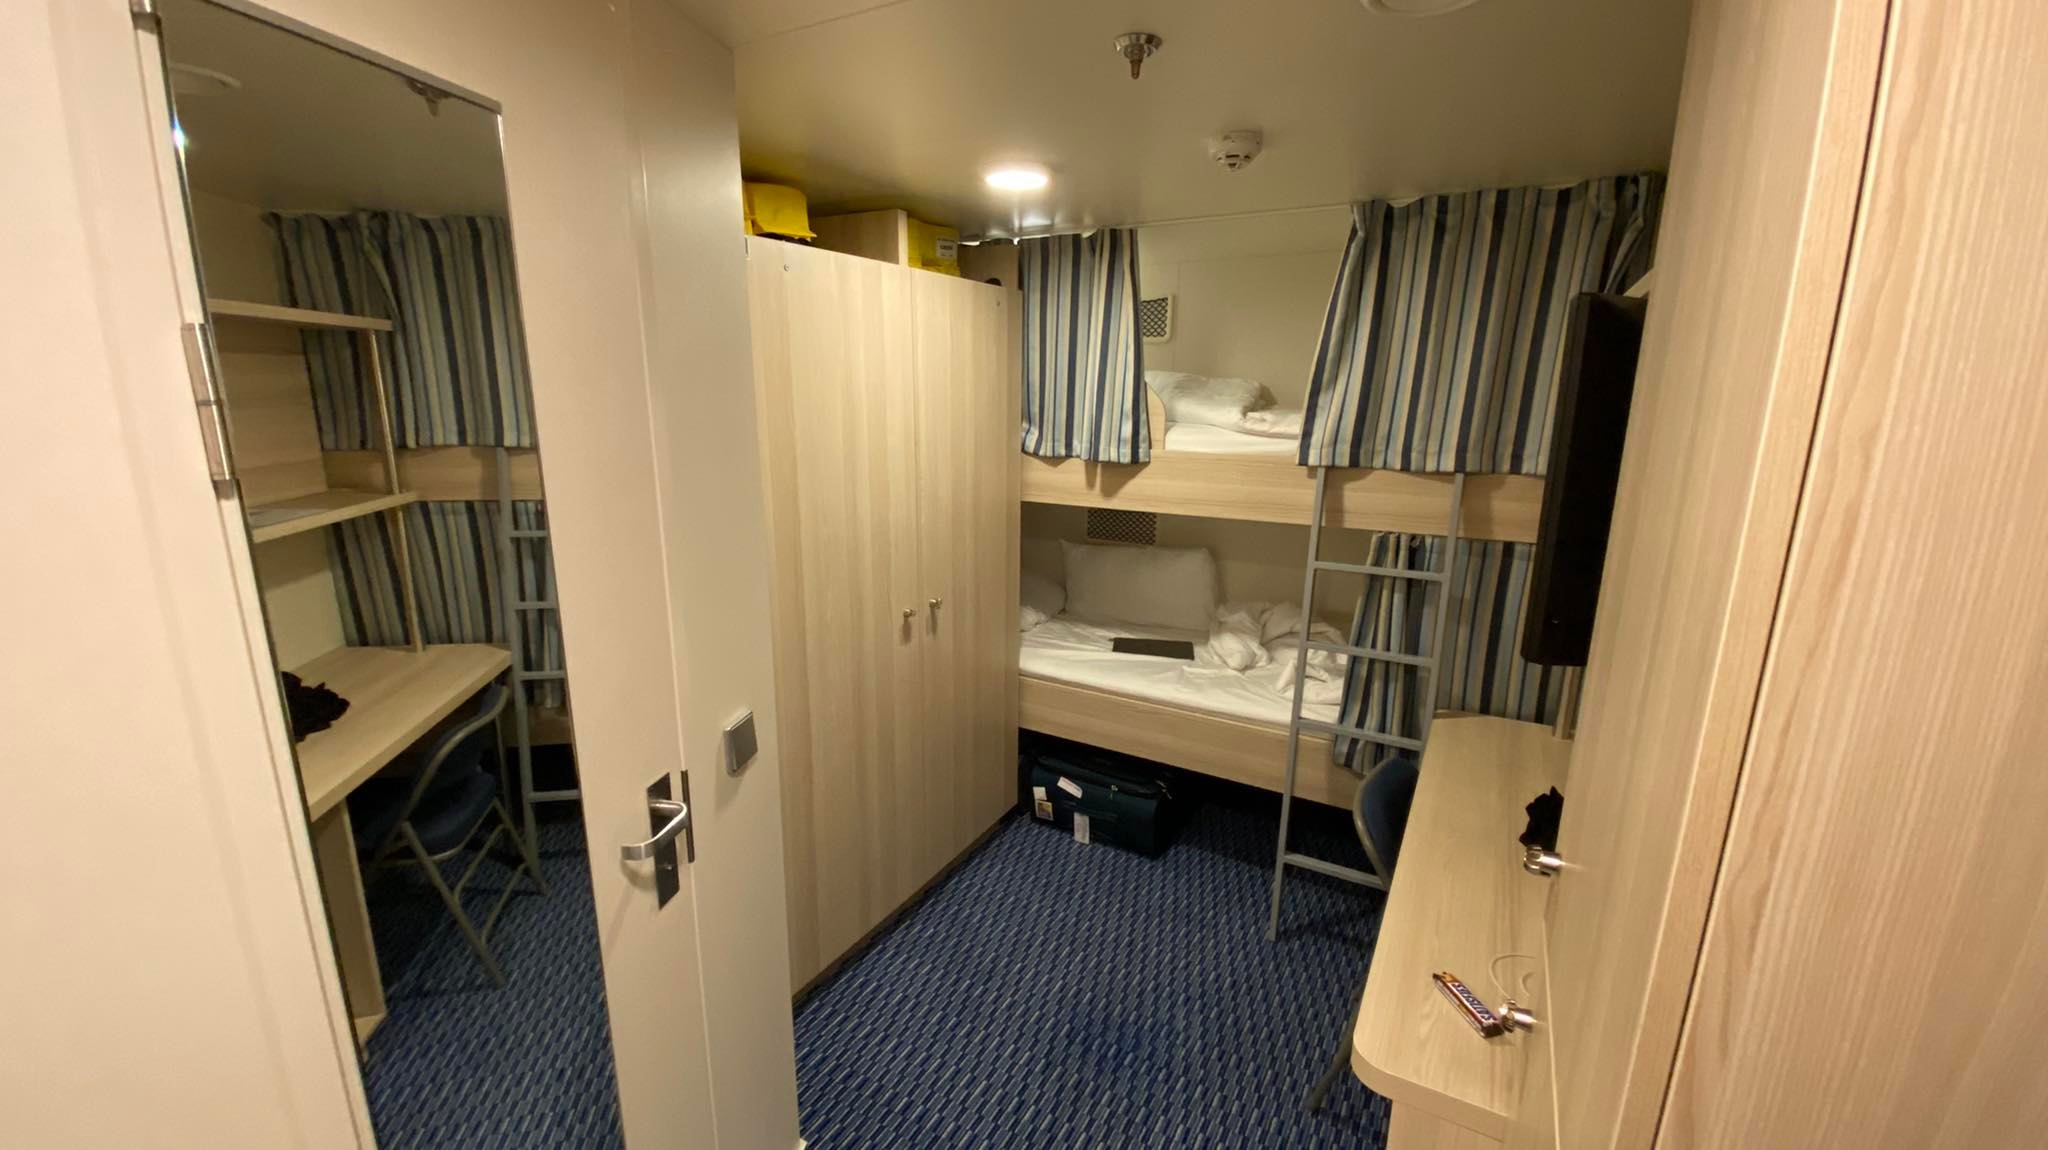 Crew Quarters on a Cruise Ship - How Do They Look?